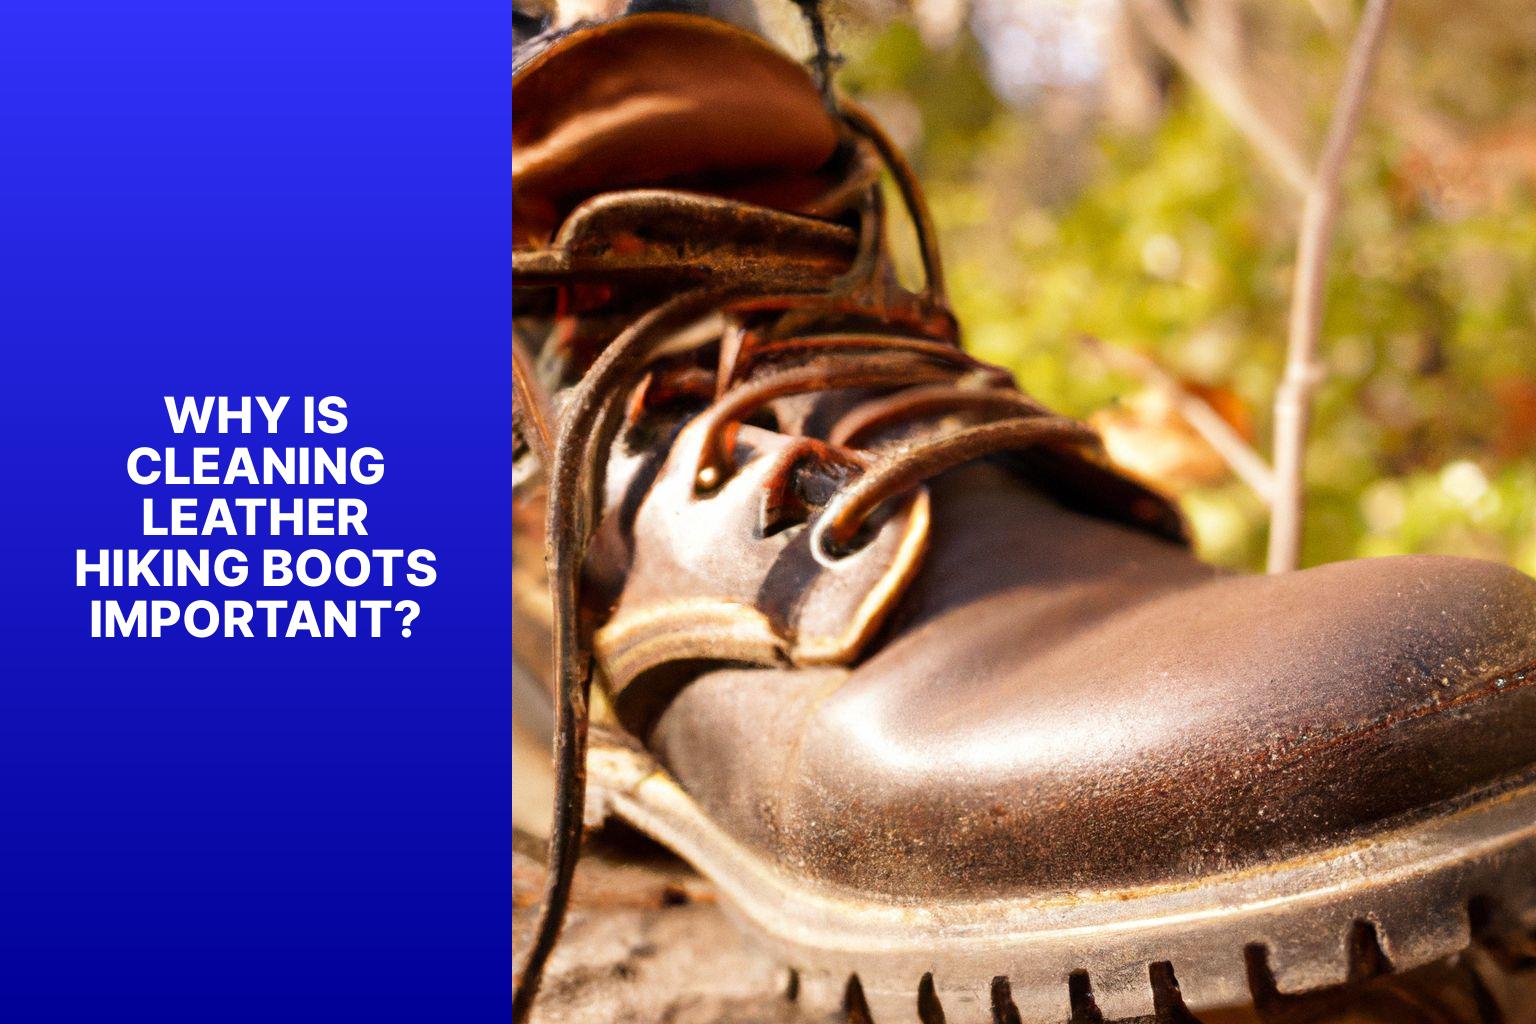 Why is Cleaning Leather Hiking Boots Important? - How to Clean Leather Hiking Boots 